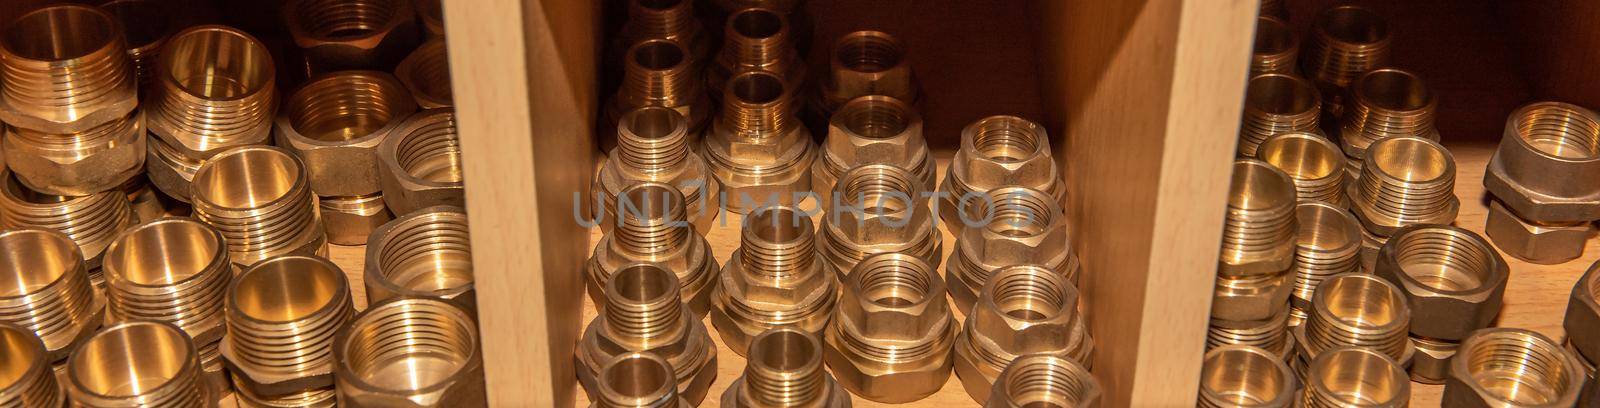 various Brass and metal fittings for plumbing.